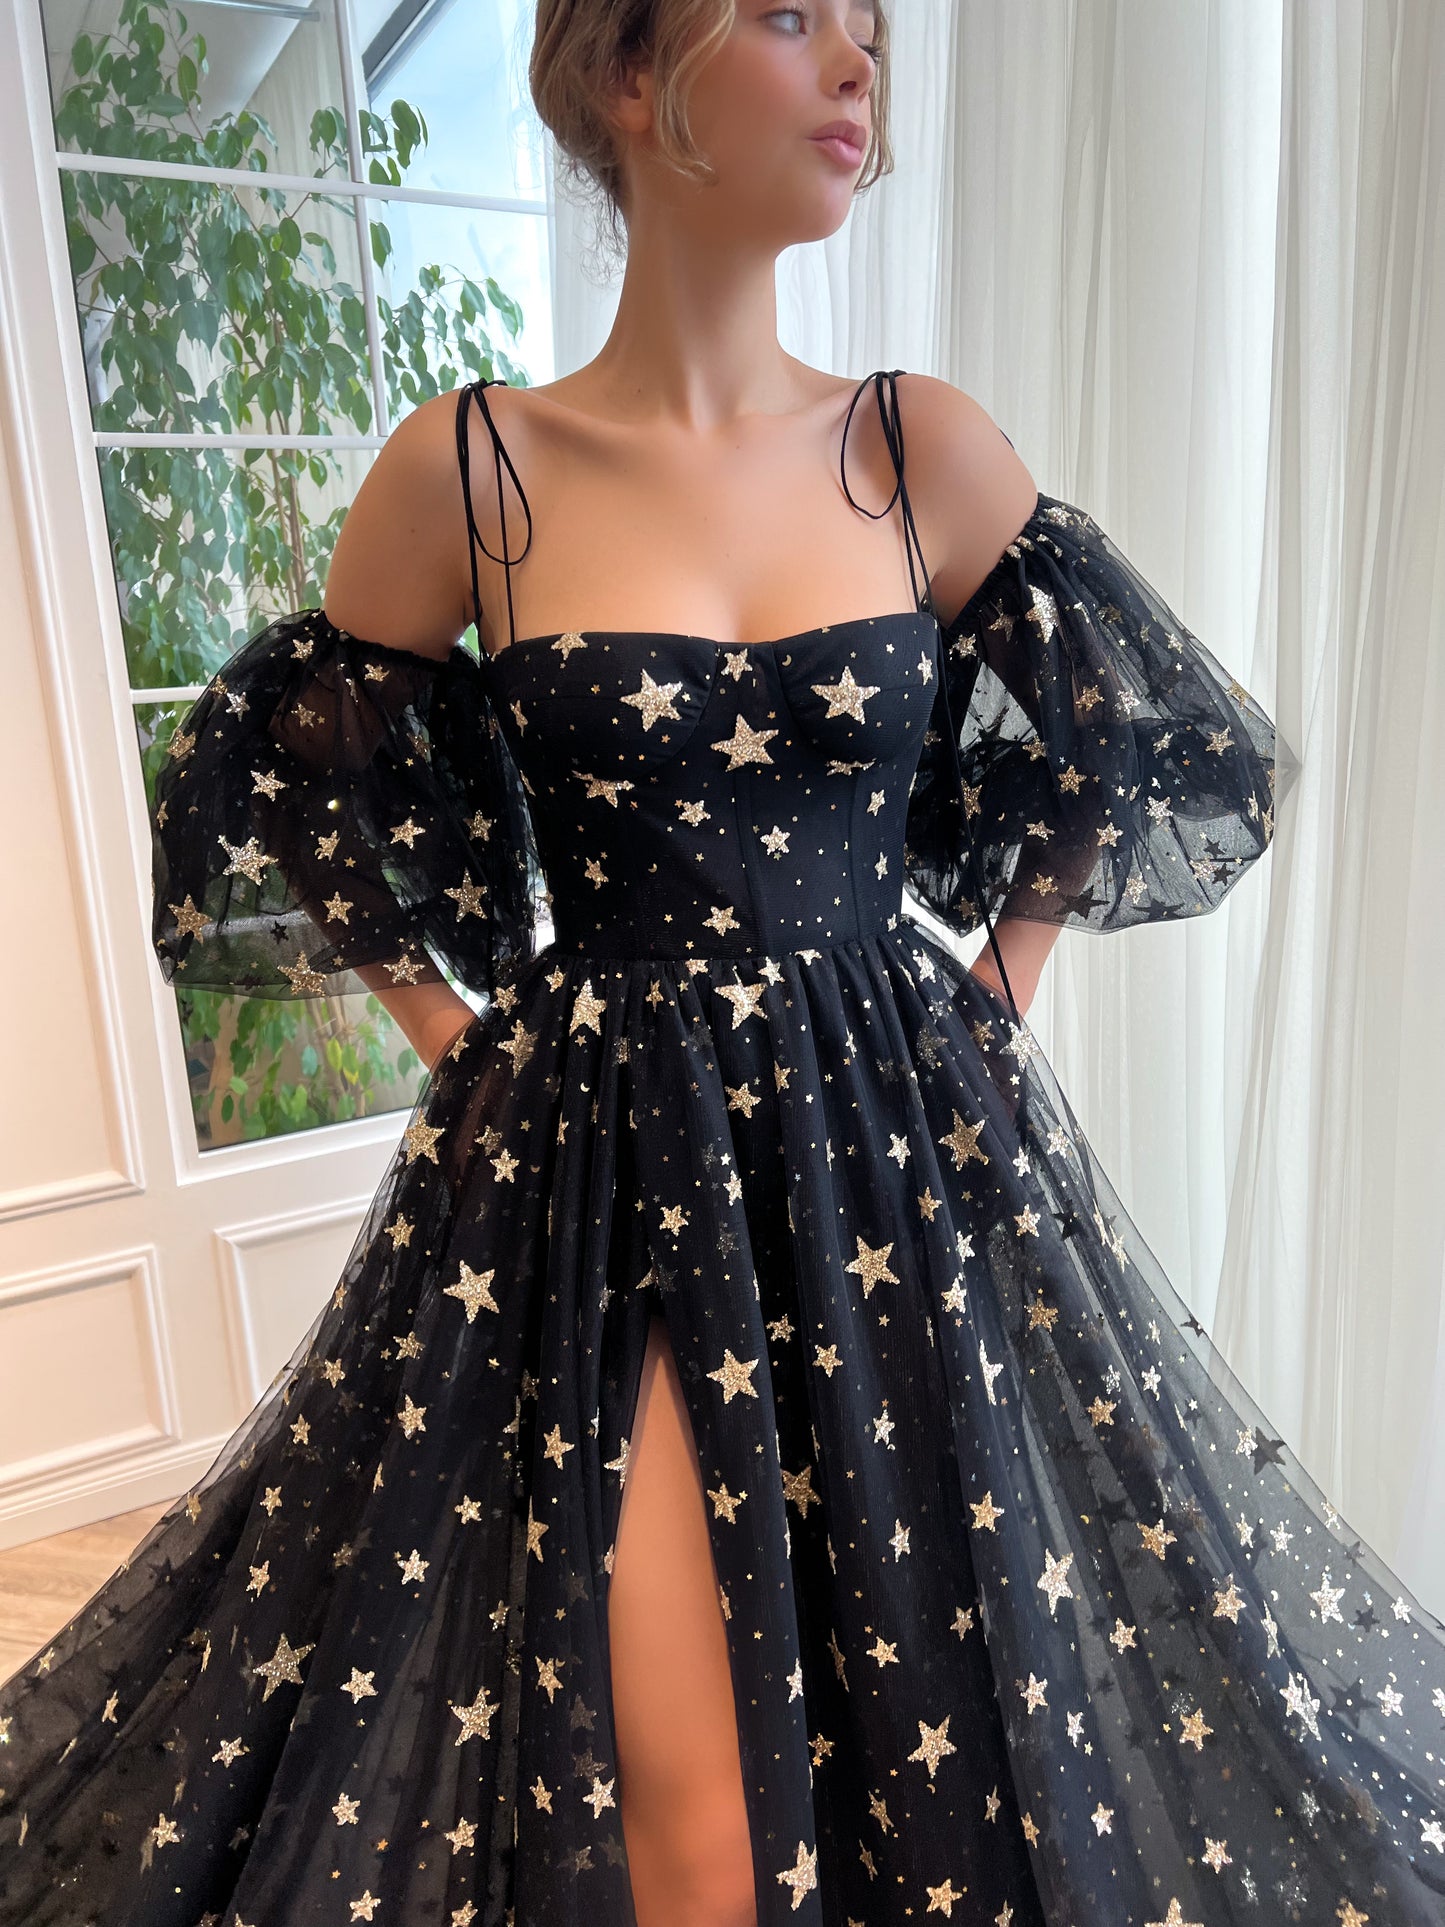 Black A-Line dress with spaghetti straps, off the shoulder sleeves and starry fabric